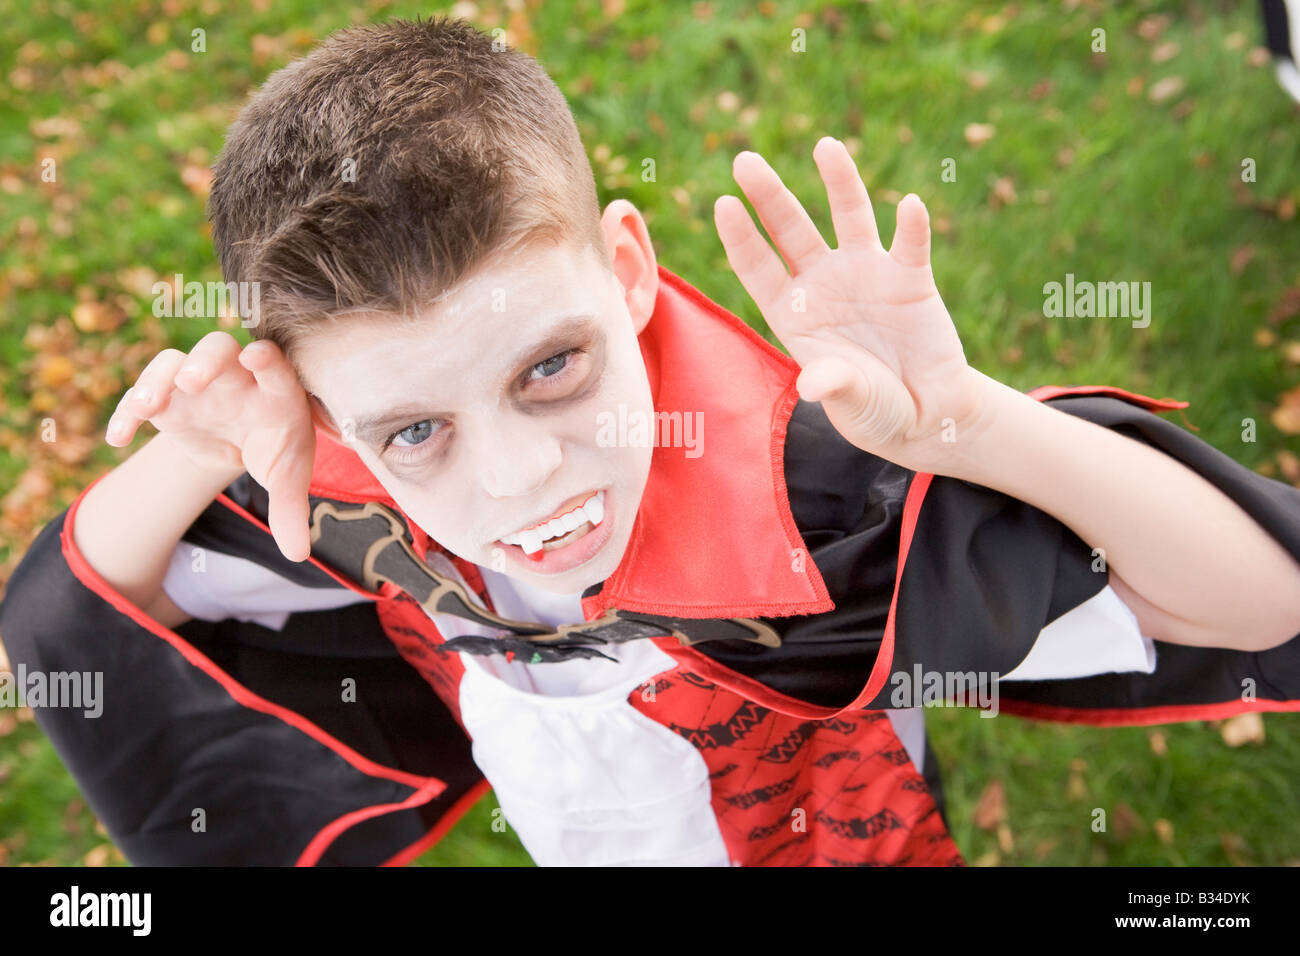 Young boy outdoors wearing vampire costume on Halloween Stock Photo